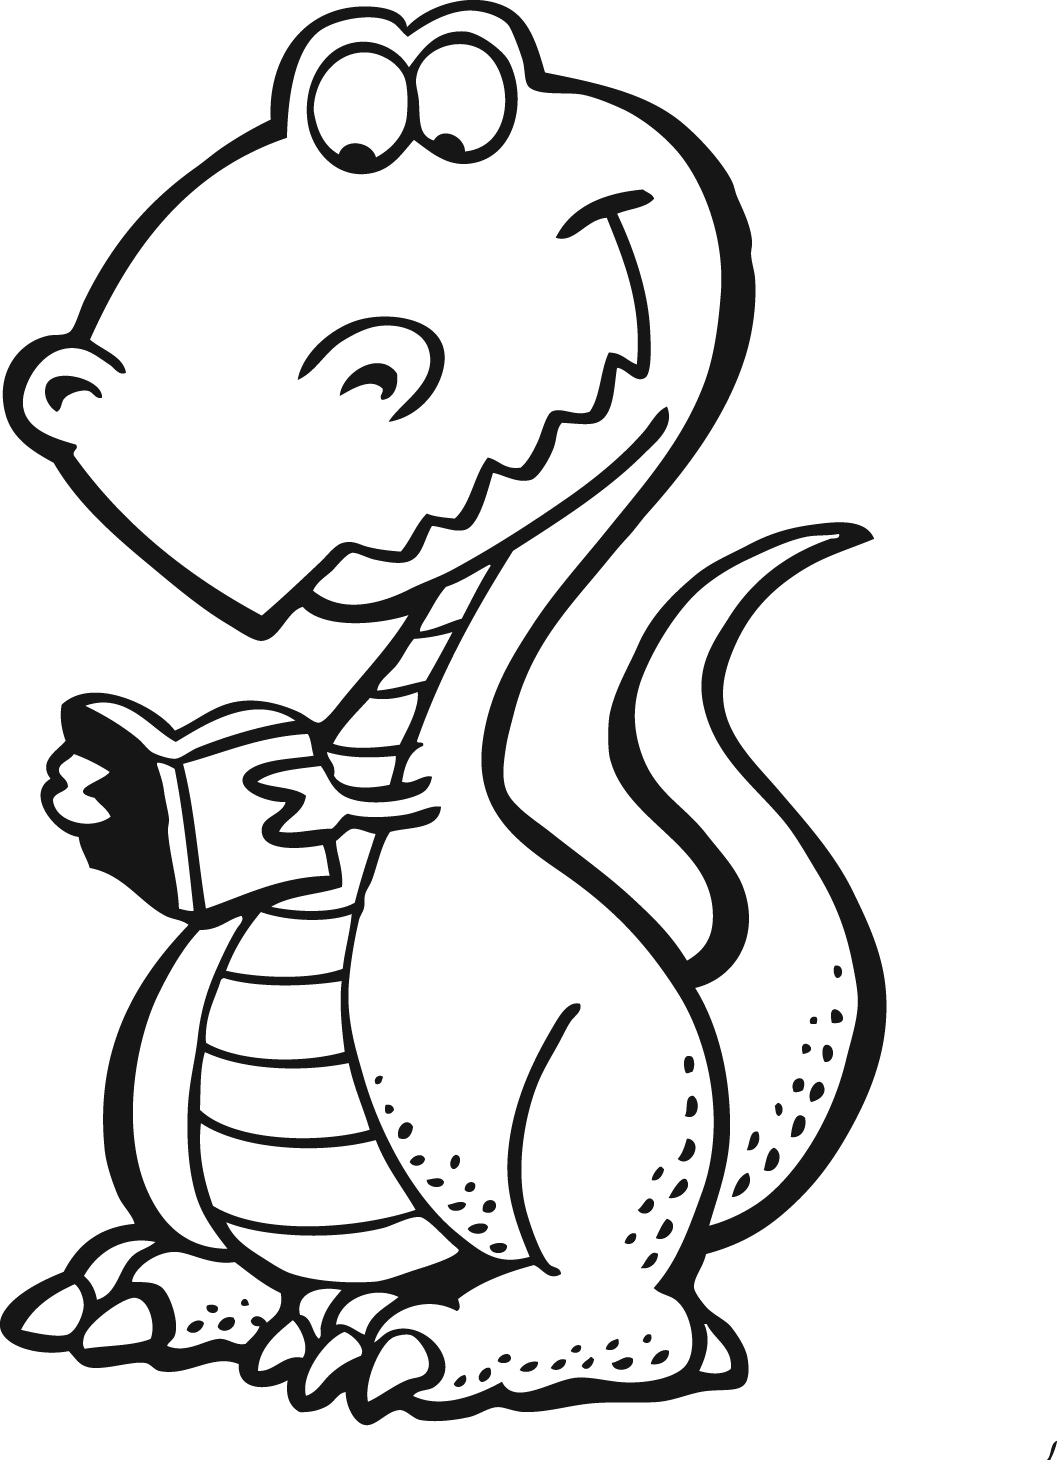 Kid Reading Black And White | Free Download Clip Art | Free Clip ...